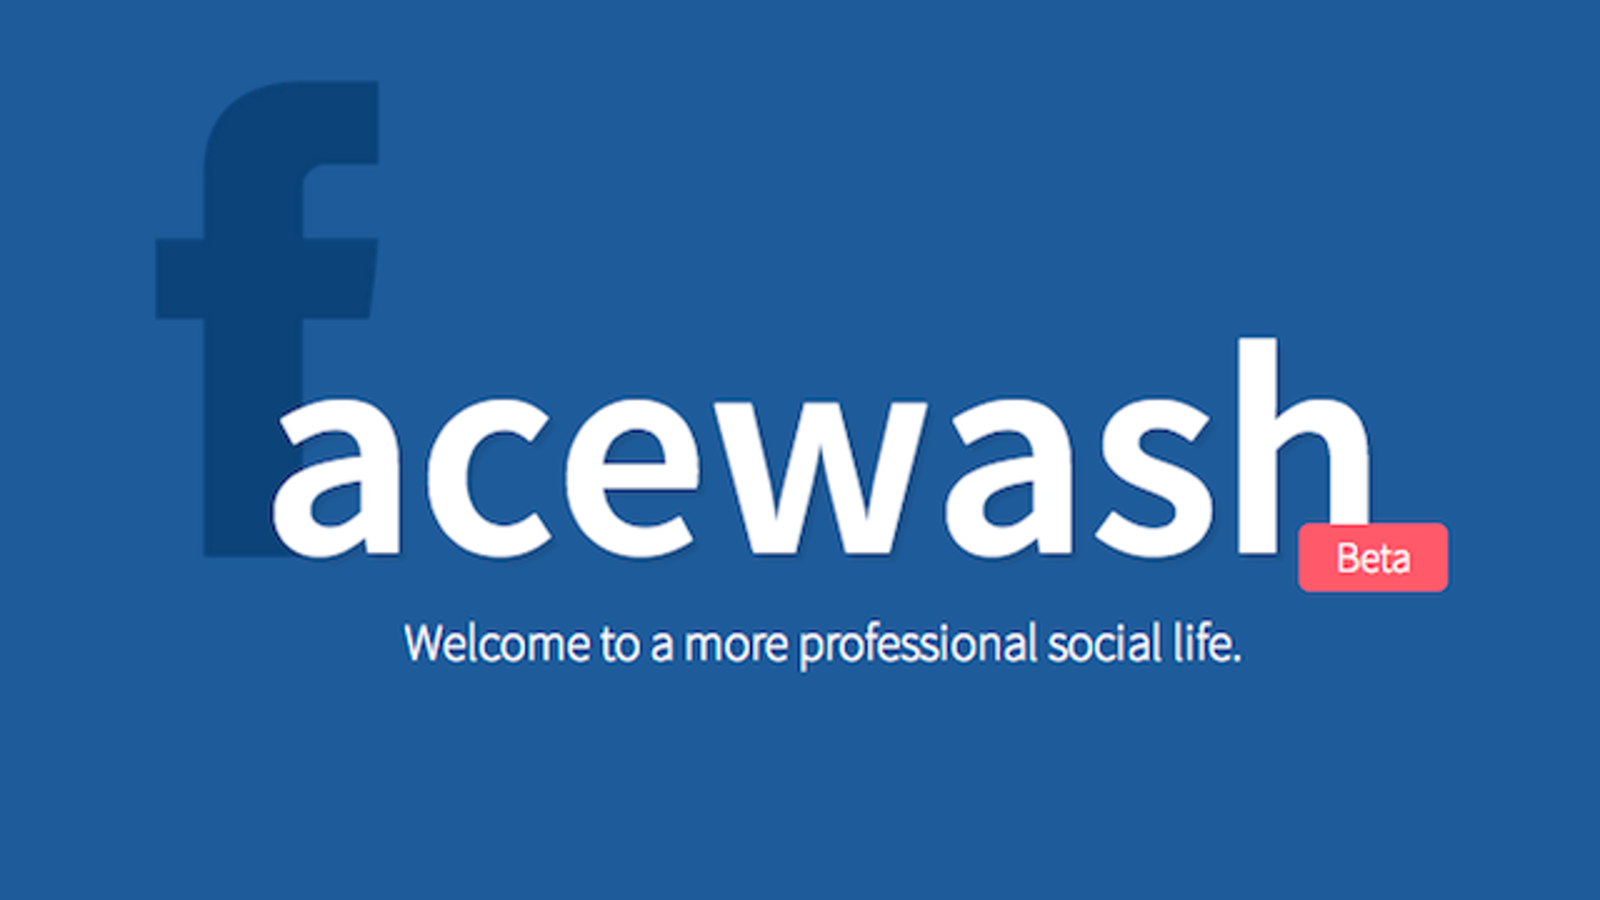 FaceWash Makes Sure Your Facebook Profile Is Clean and ...
